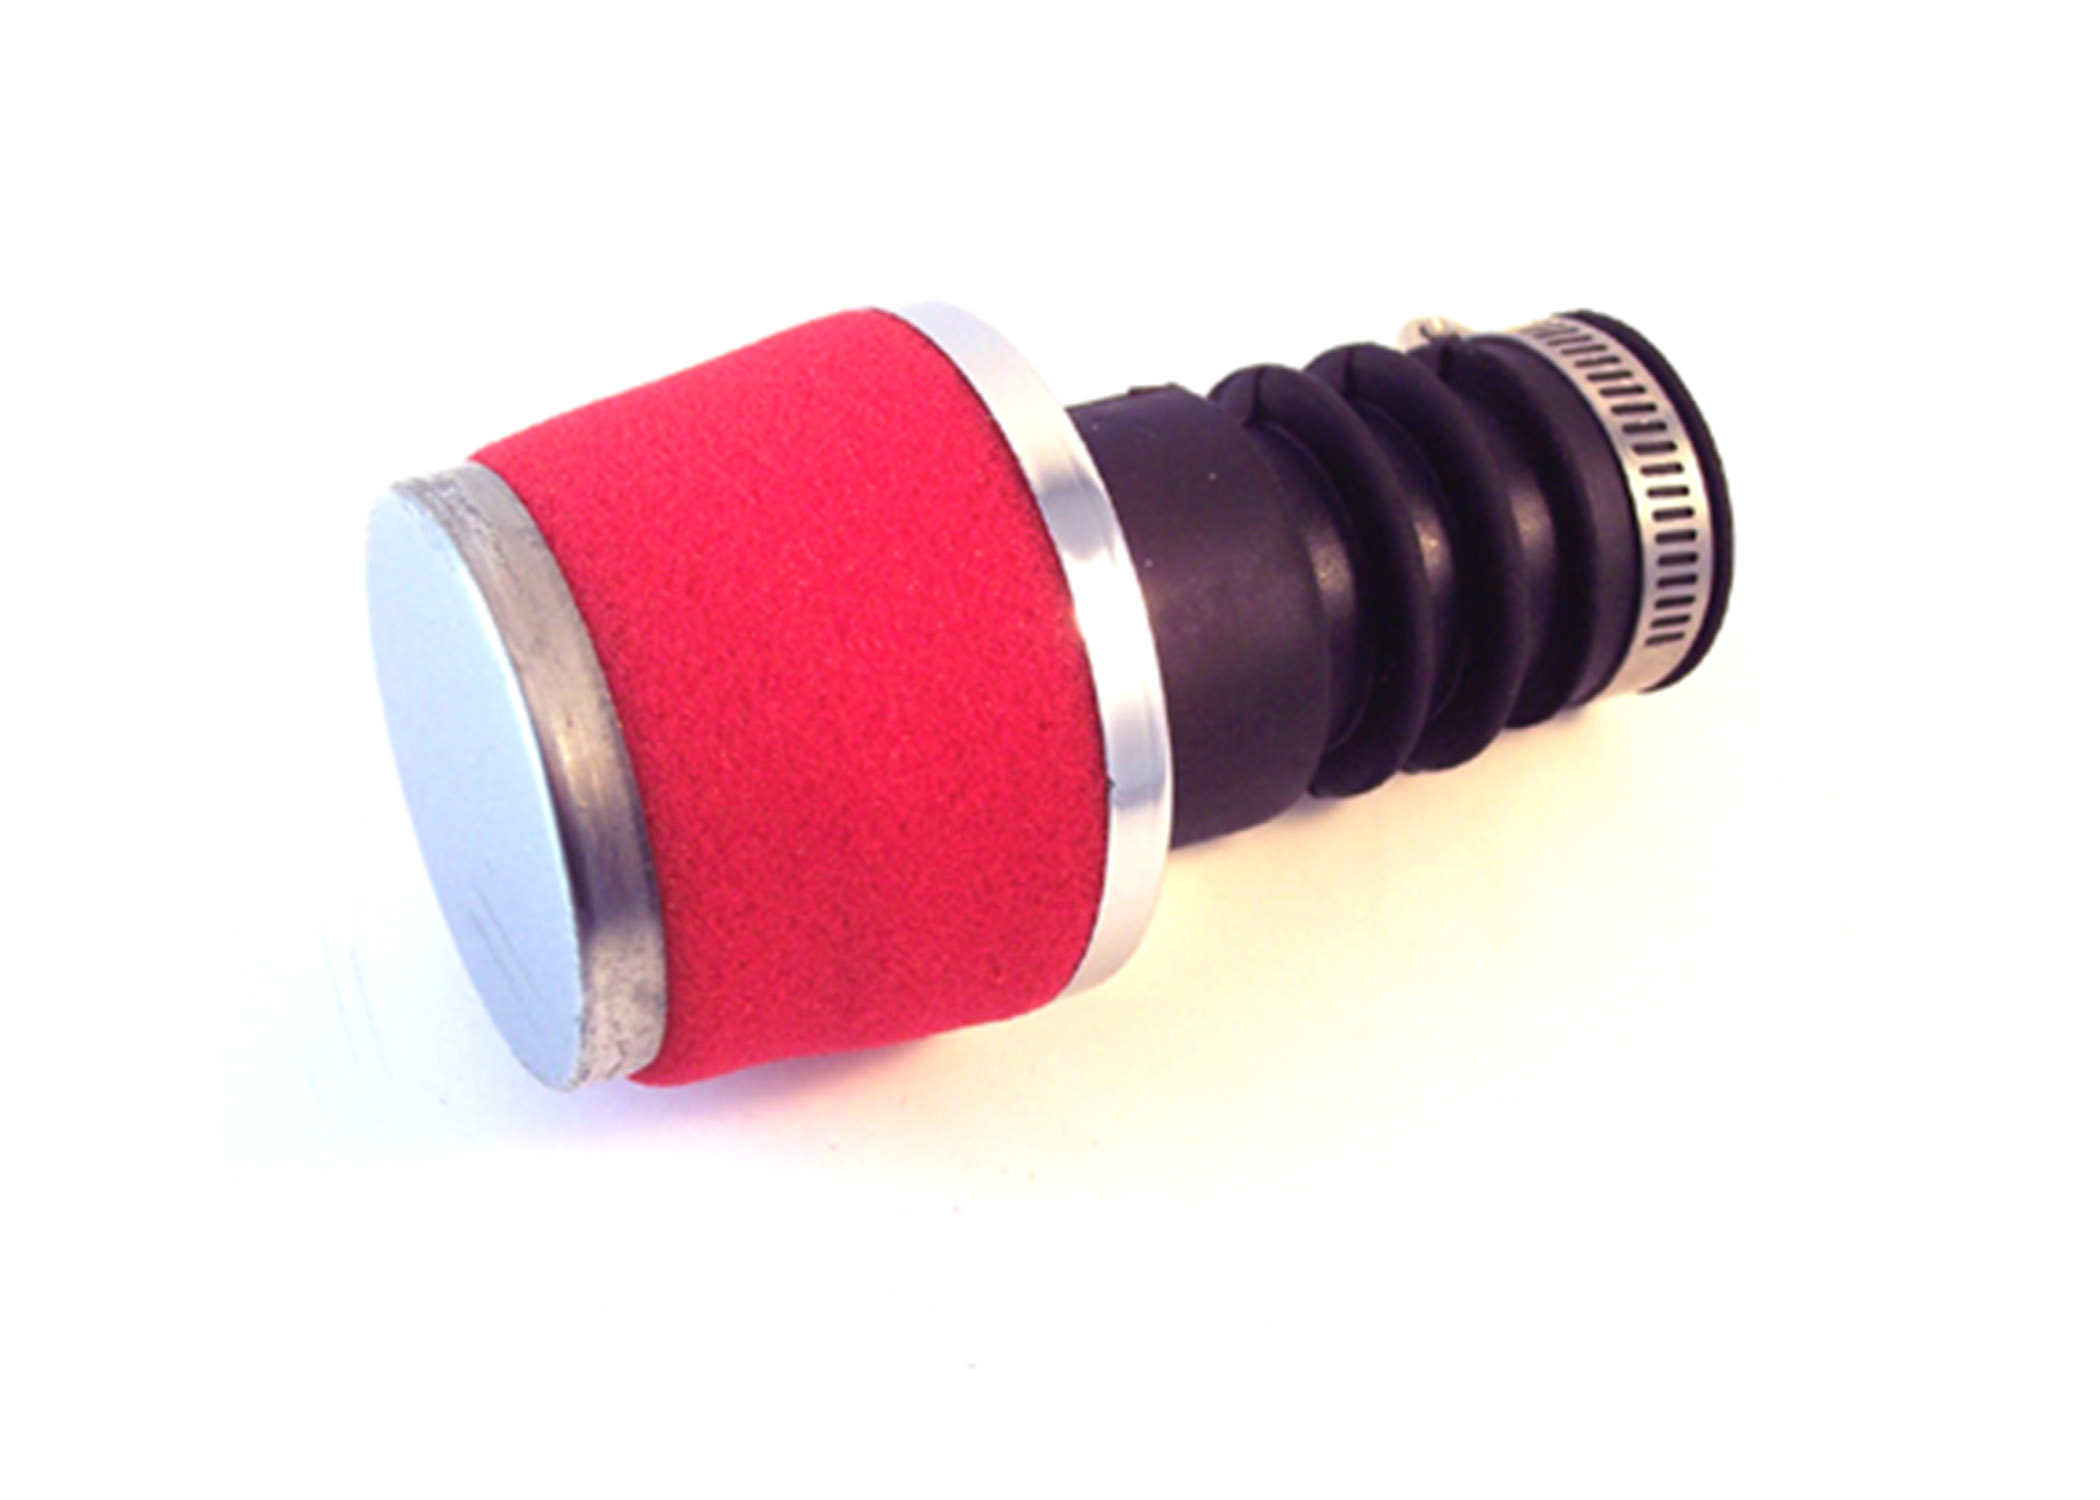 PUCH MAXI/ UNIVERSEEL SACHS Powerfilter/luchtfilter Rood 17mm voor 12mm 15mm carburateur 